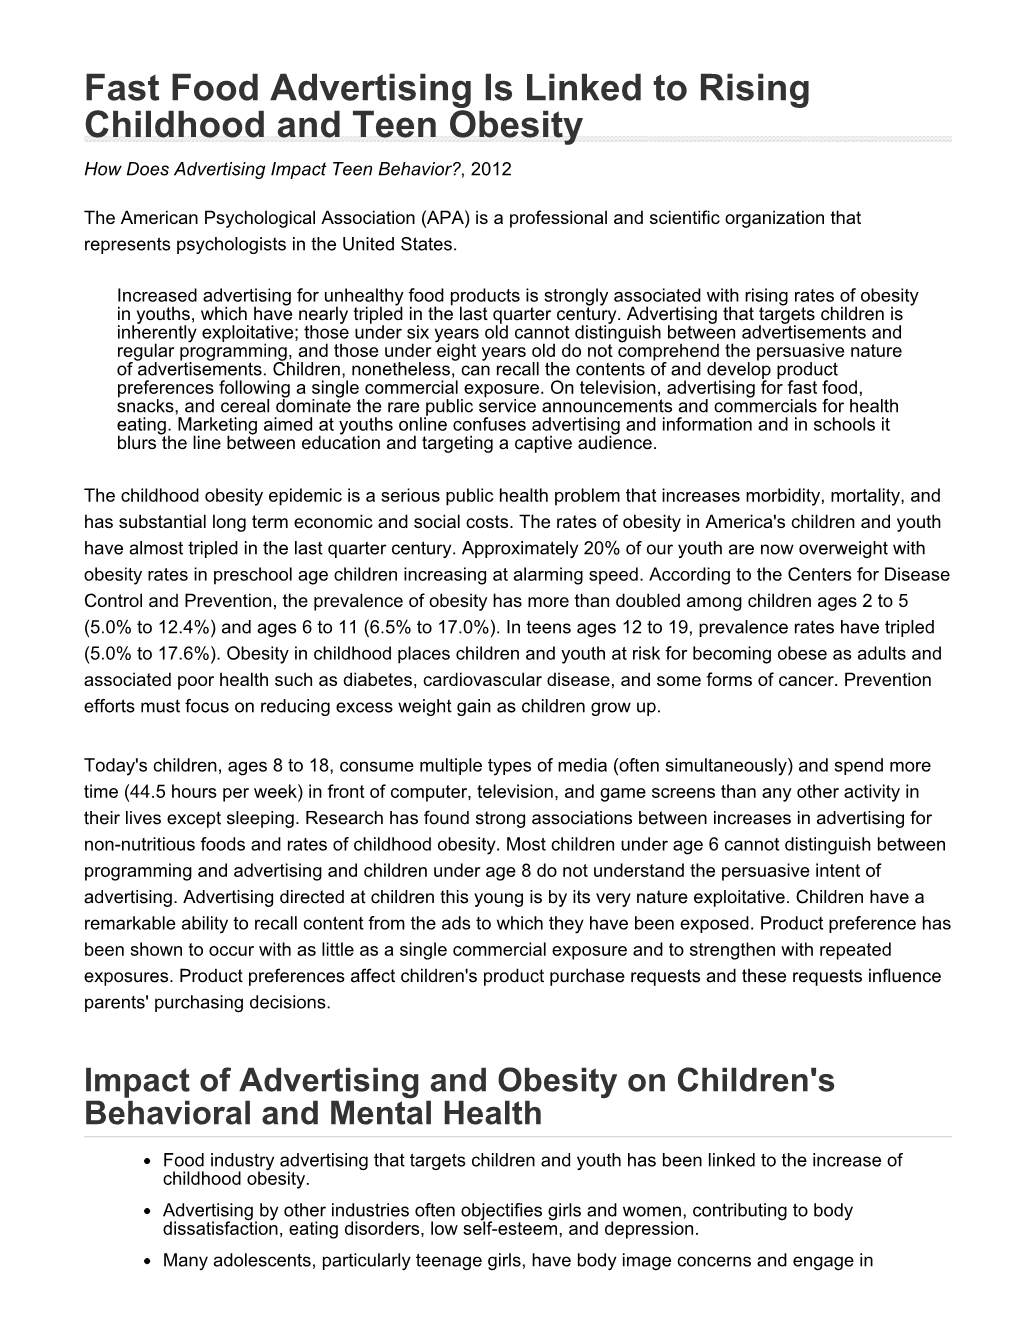 Fast Food Advertising Is Linked to Rising Childhood and Teen Obesity How Does Advertising Impact Teen Behavior?, 2012